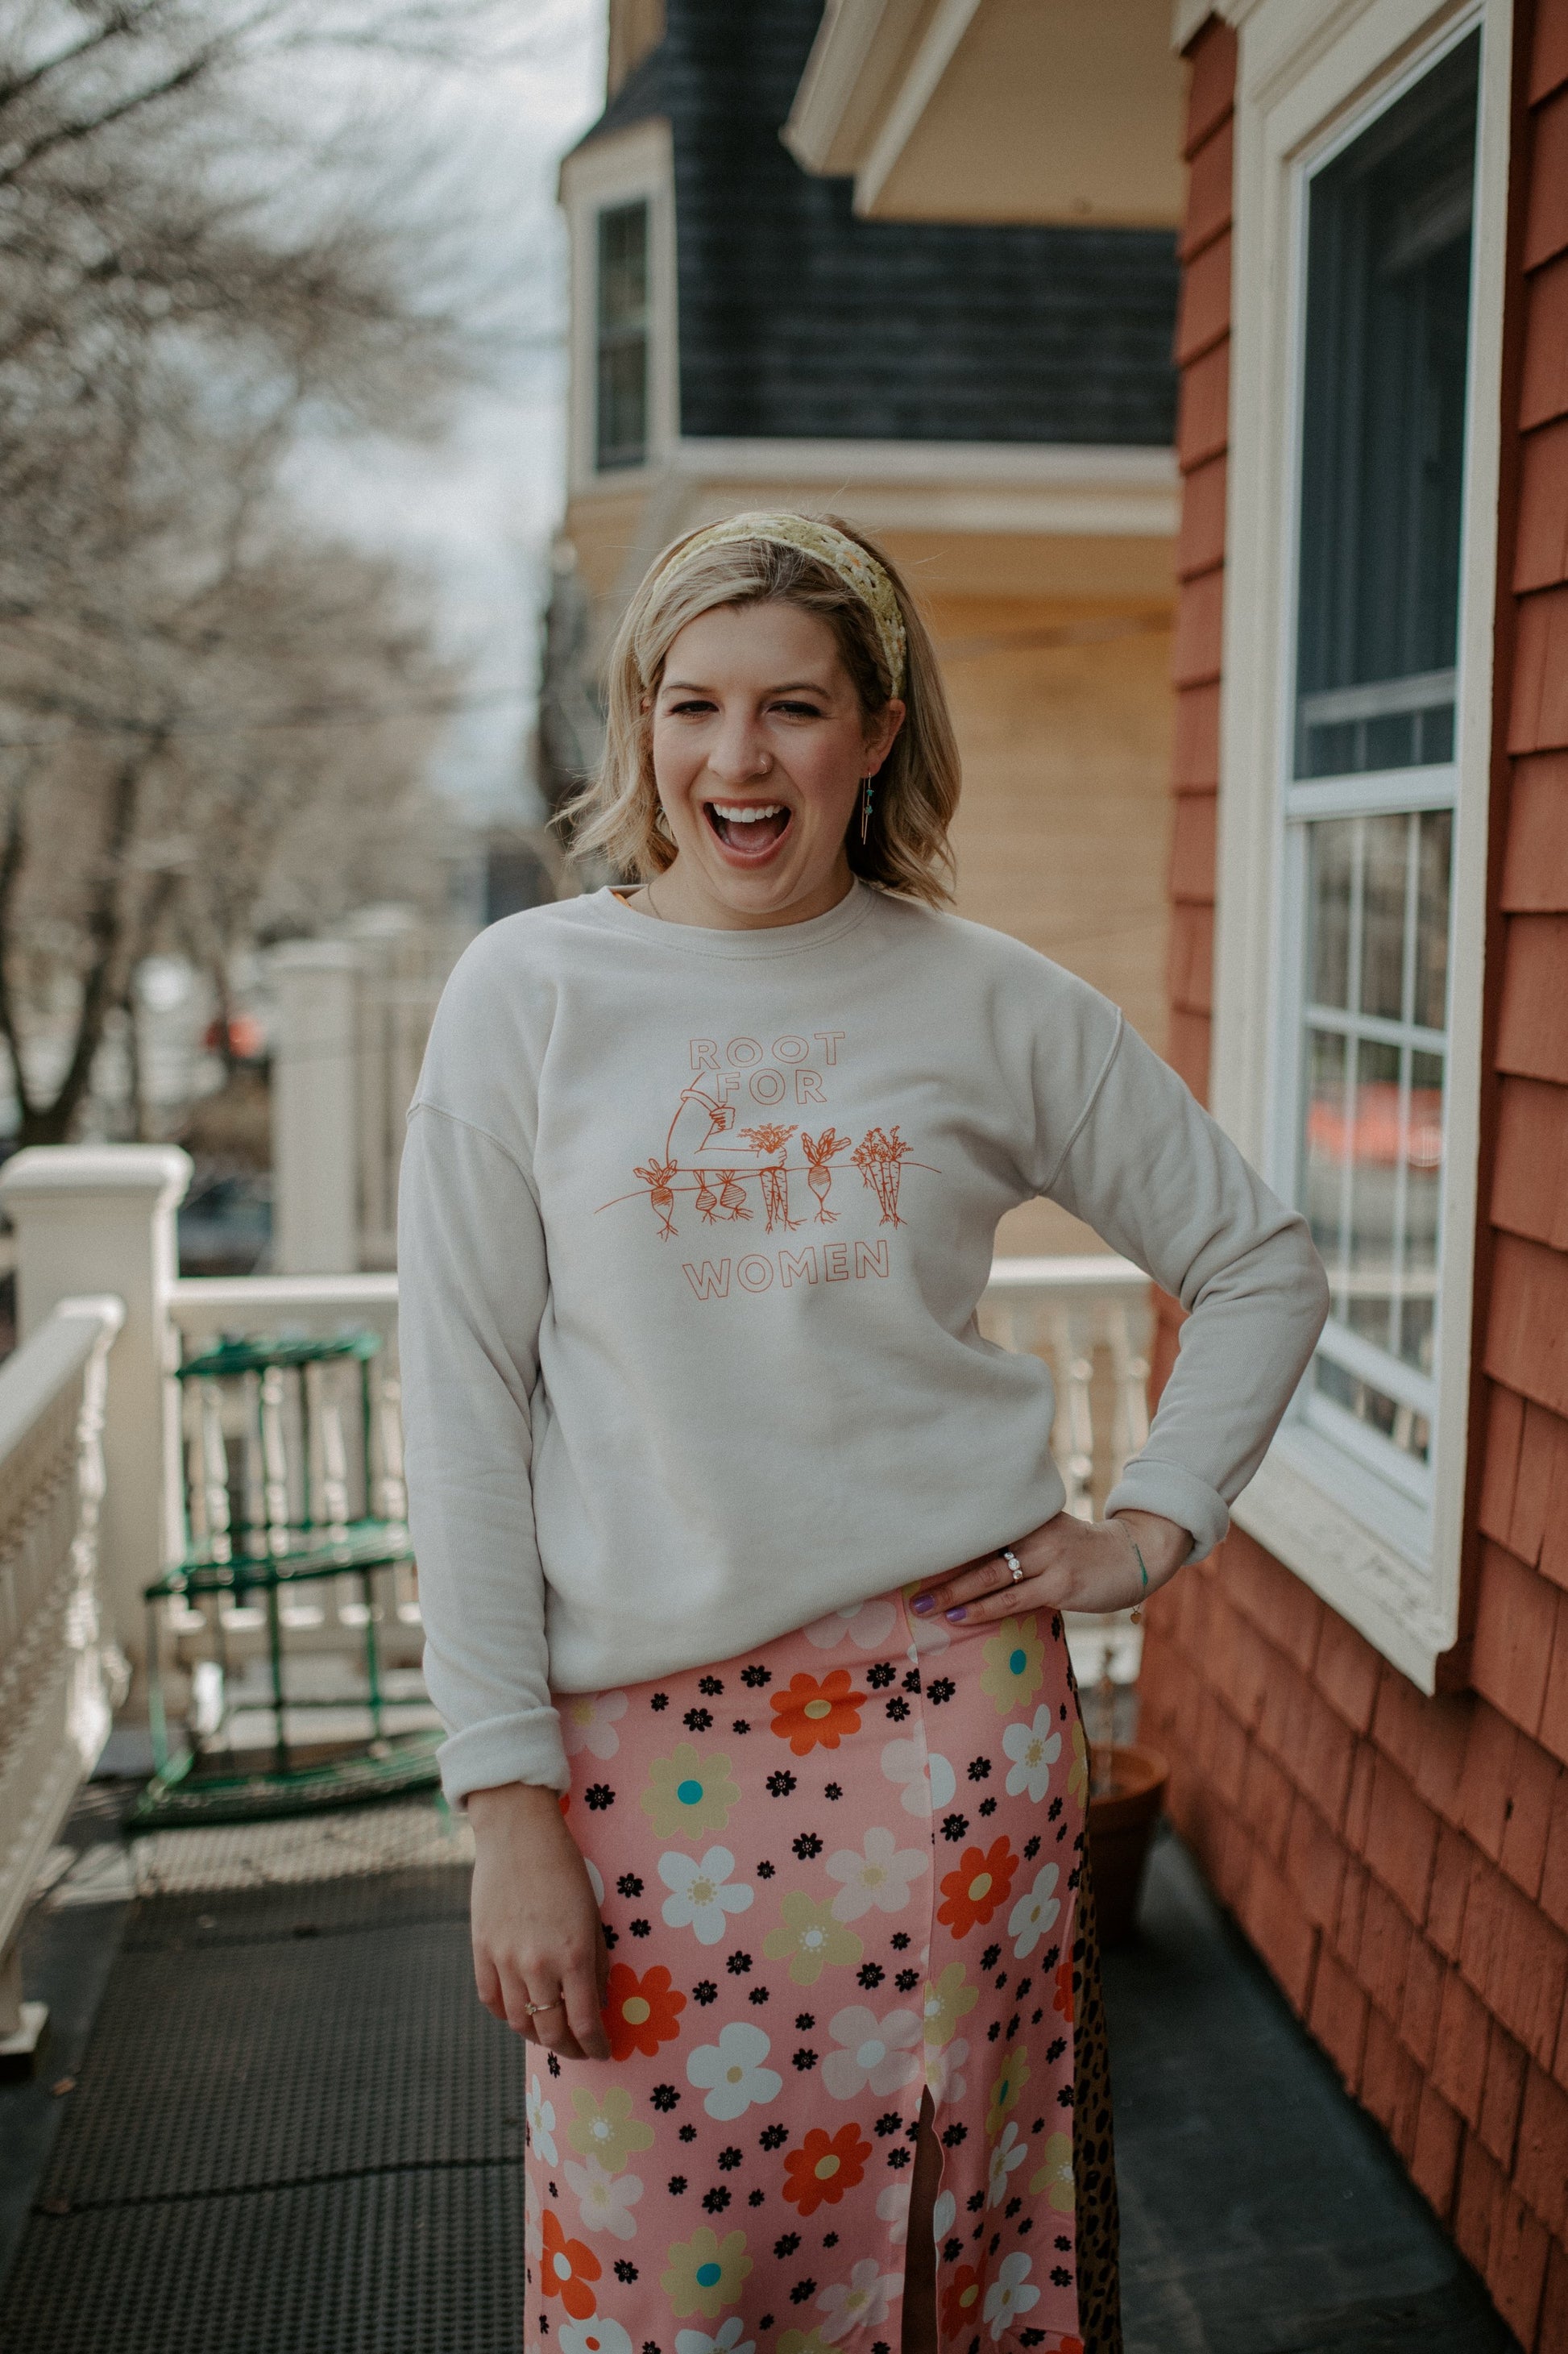  A woman wears a natural color Root for Women crewneck with a flowered skirt